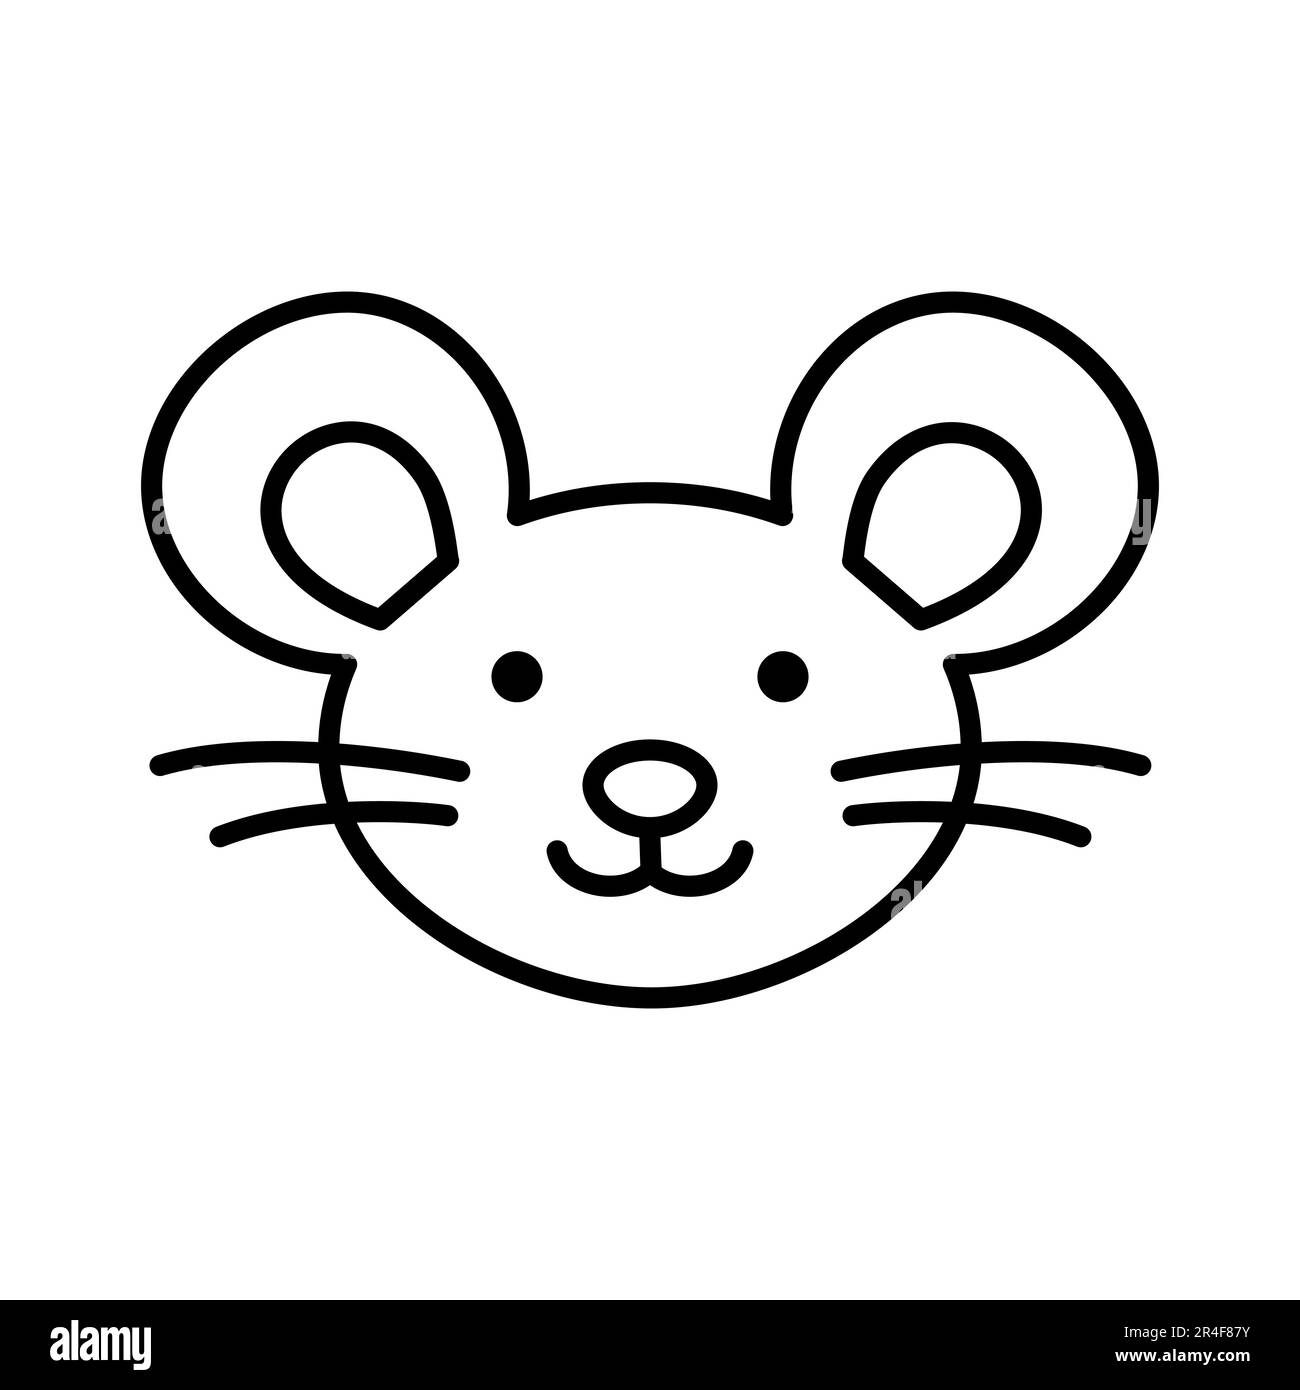 Animal mouse face Black and White Stock Photos & Images - Alamy